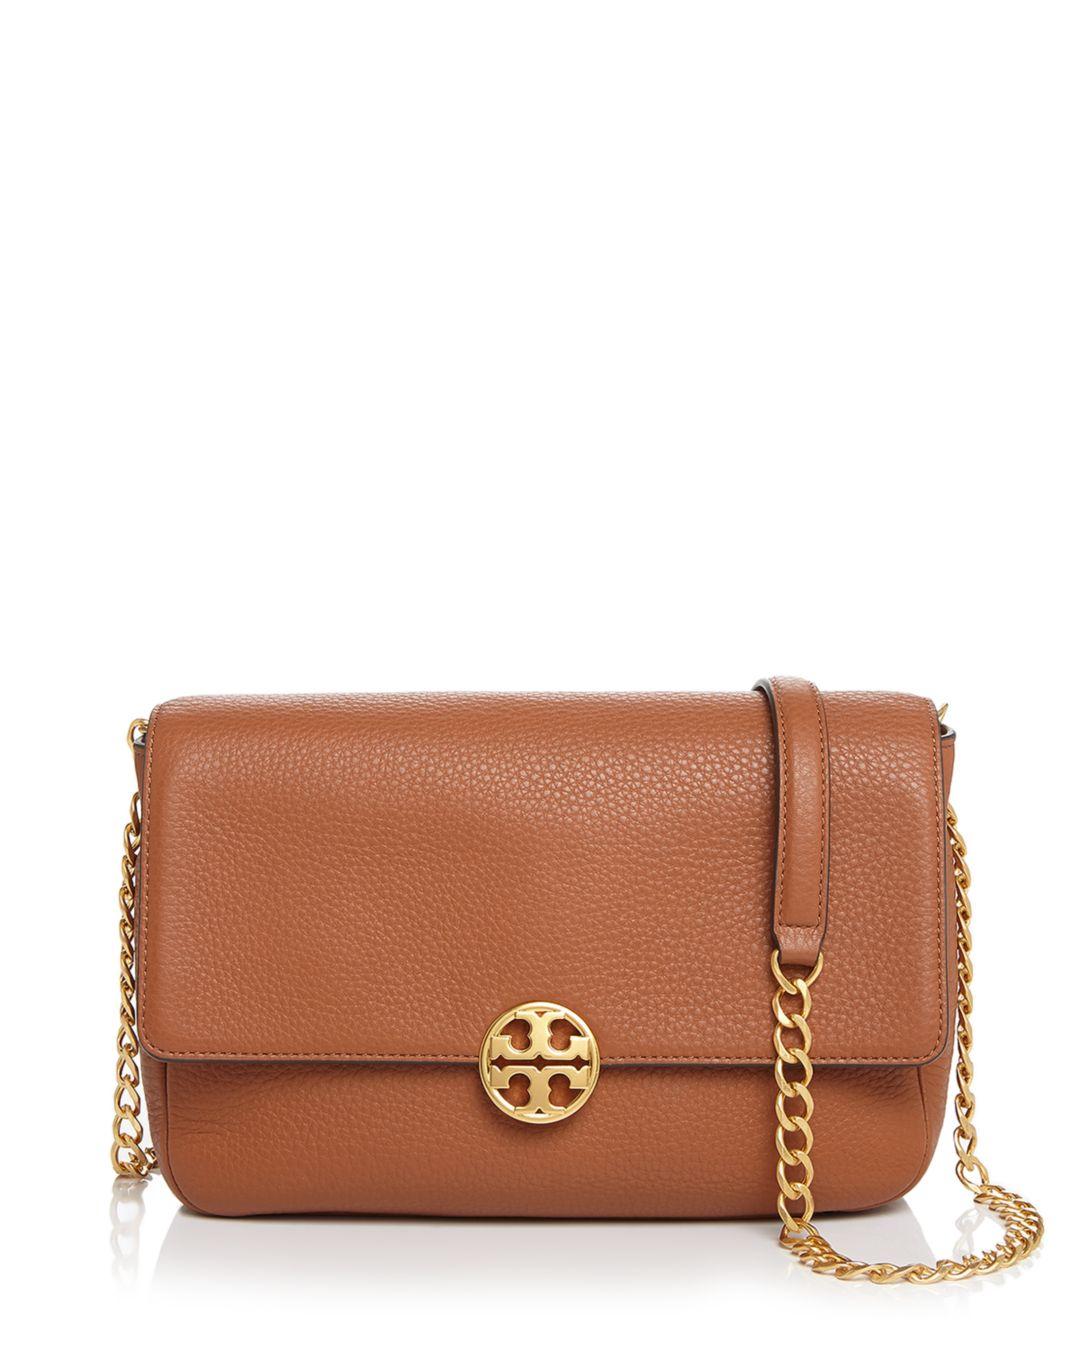 Tory Burch Chelsea Leather Shoulder Bag in Brown/Gold (Brown) - Save 34% - Lyst